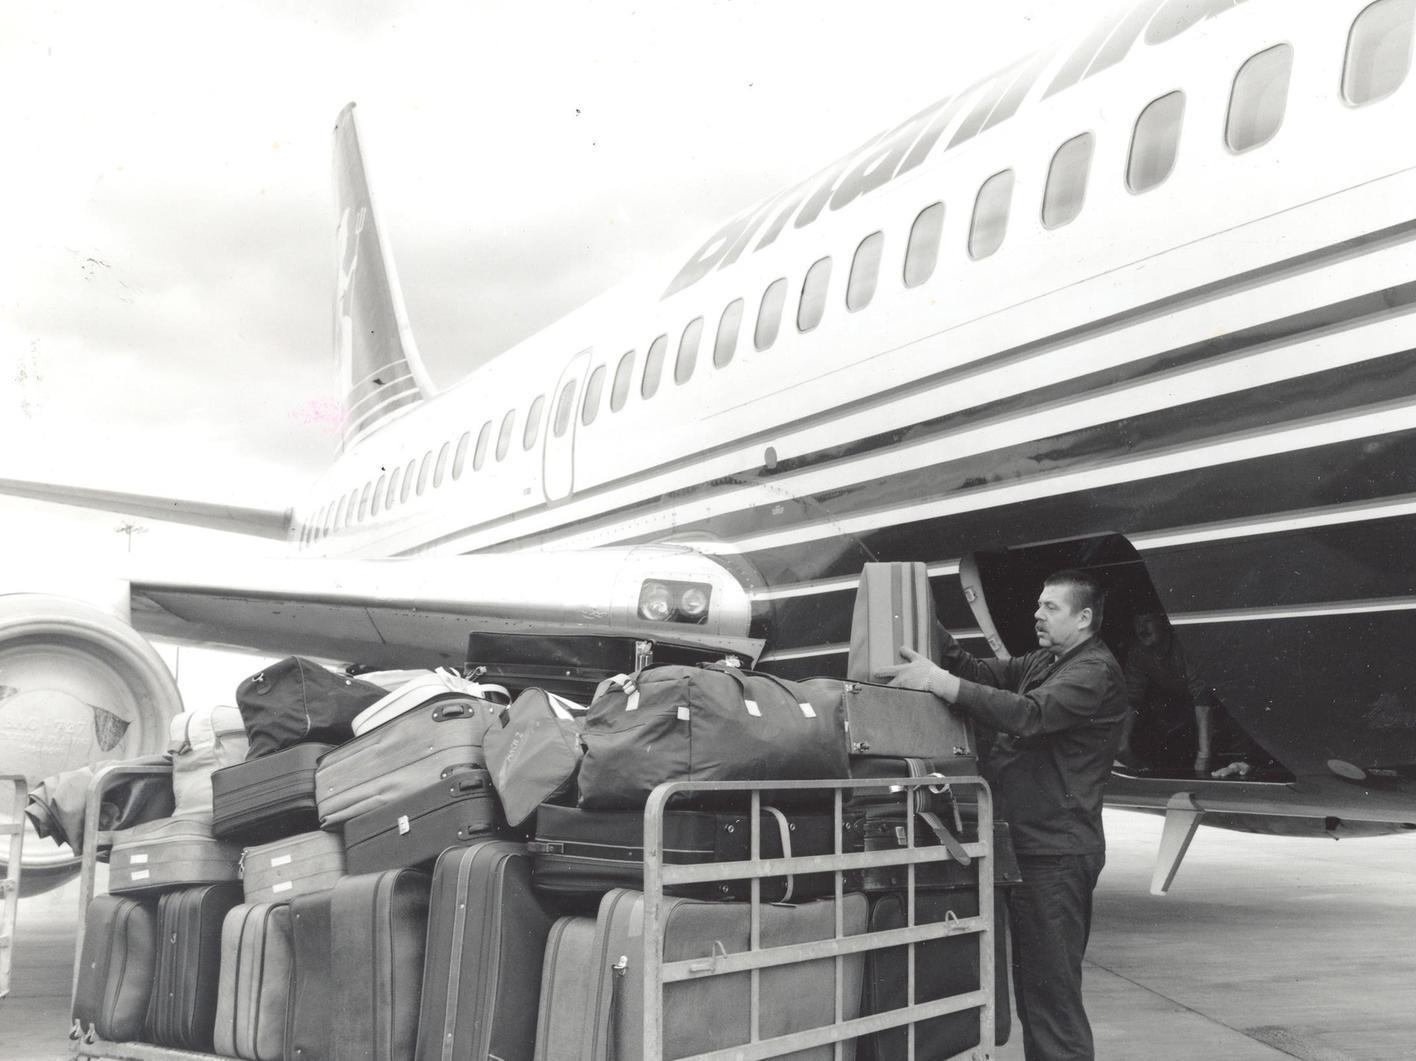 Baggage is loaded onto a holiday flight.